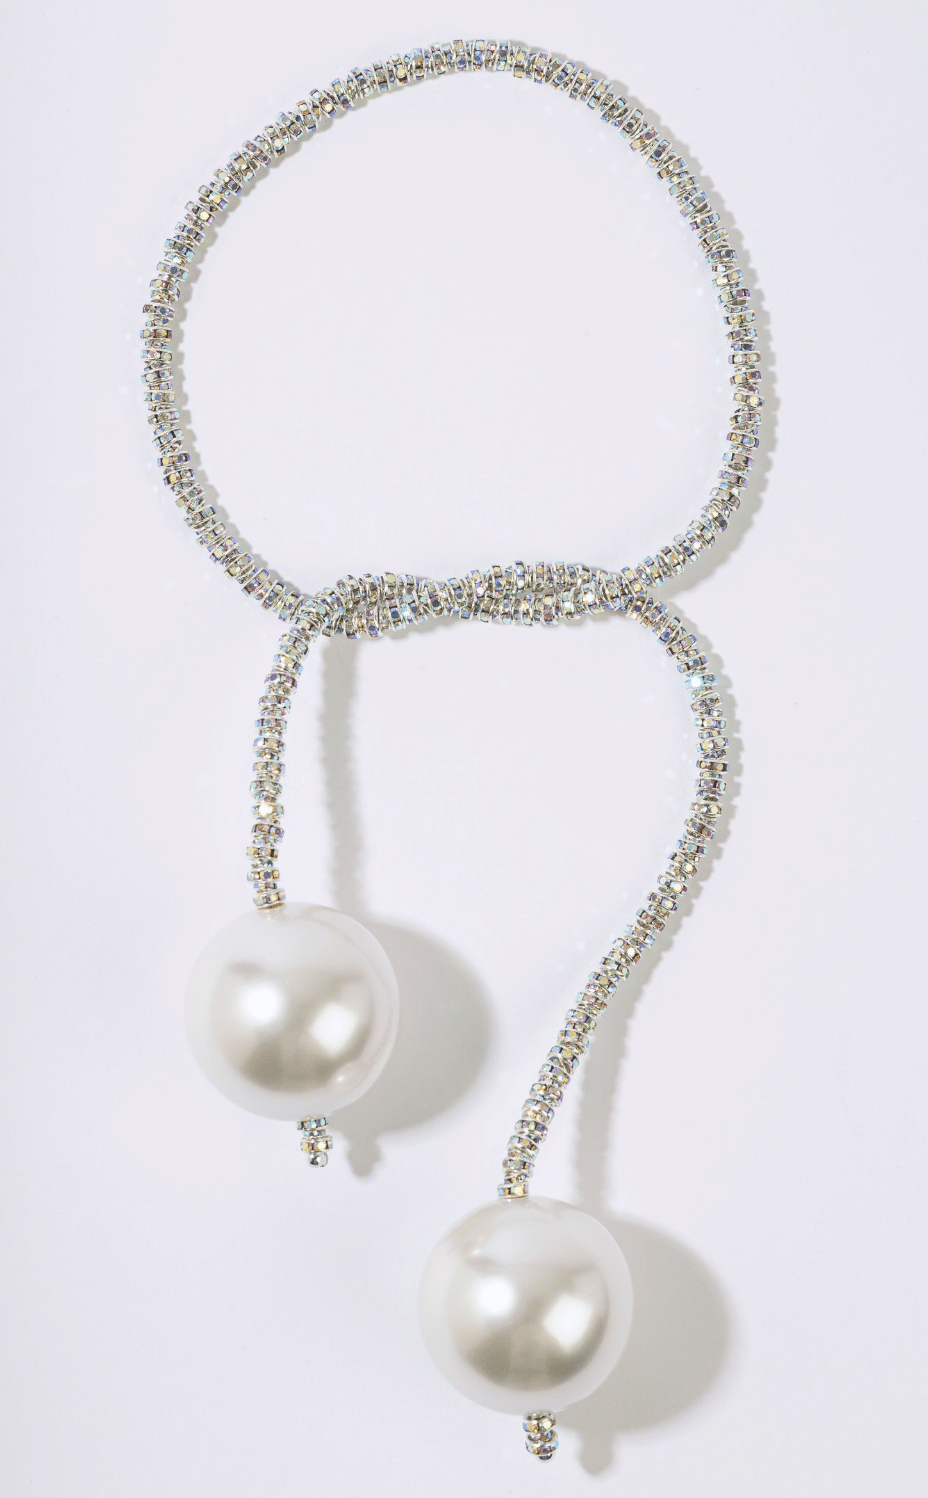 Silver Ball Chain fra Pearl Octopuss.y, kr 3 200.